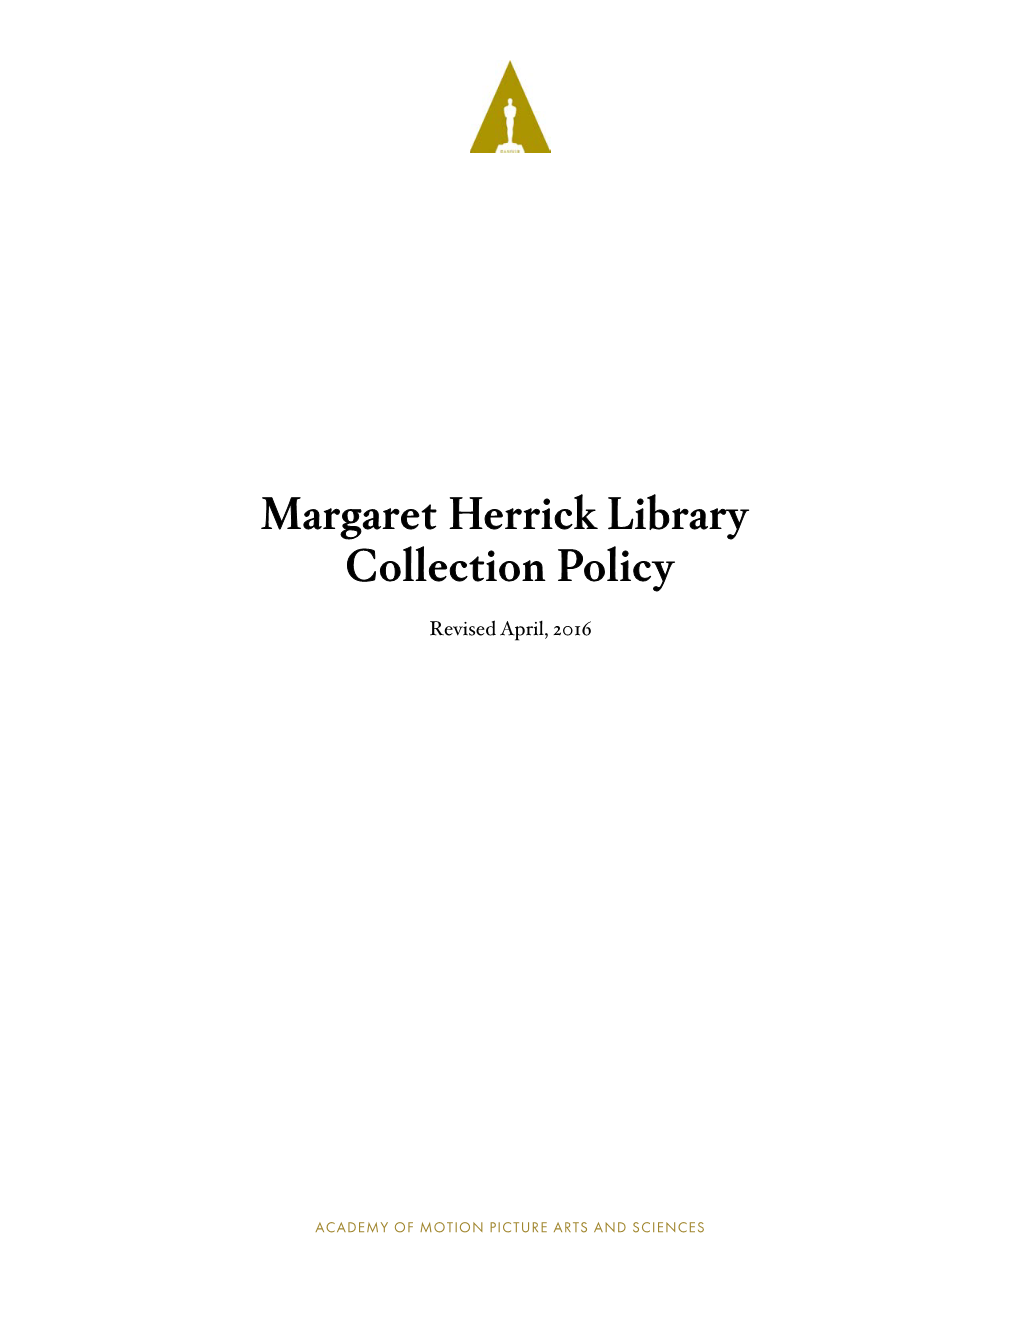 Margaret Herrick Library Collection Policy